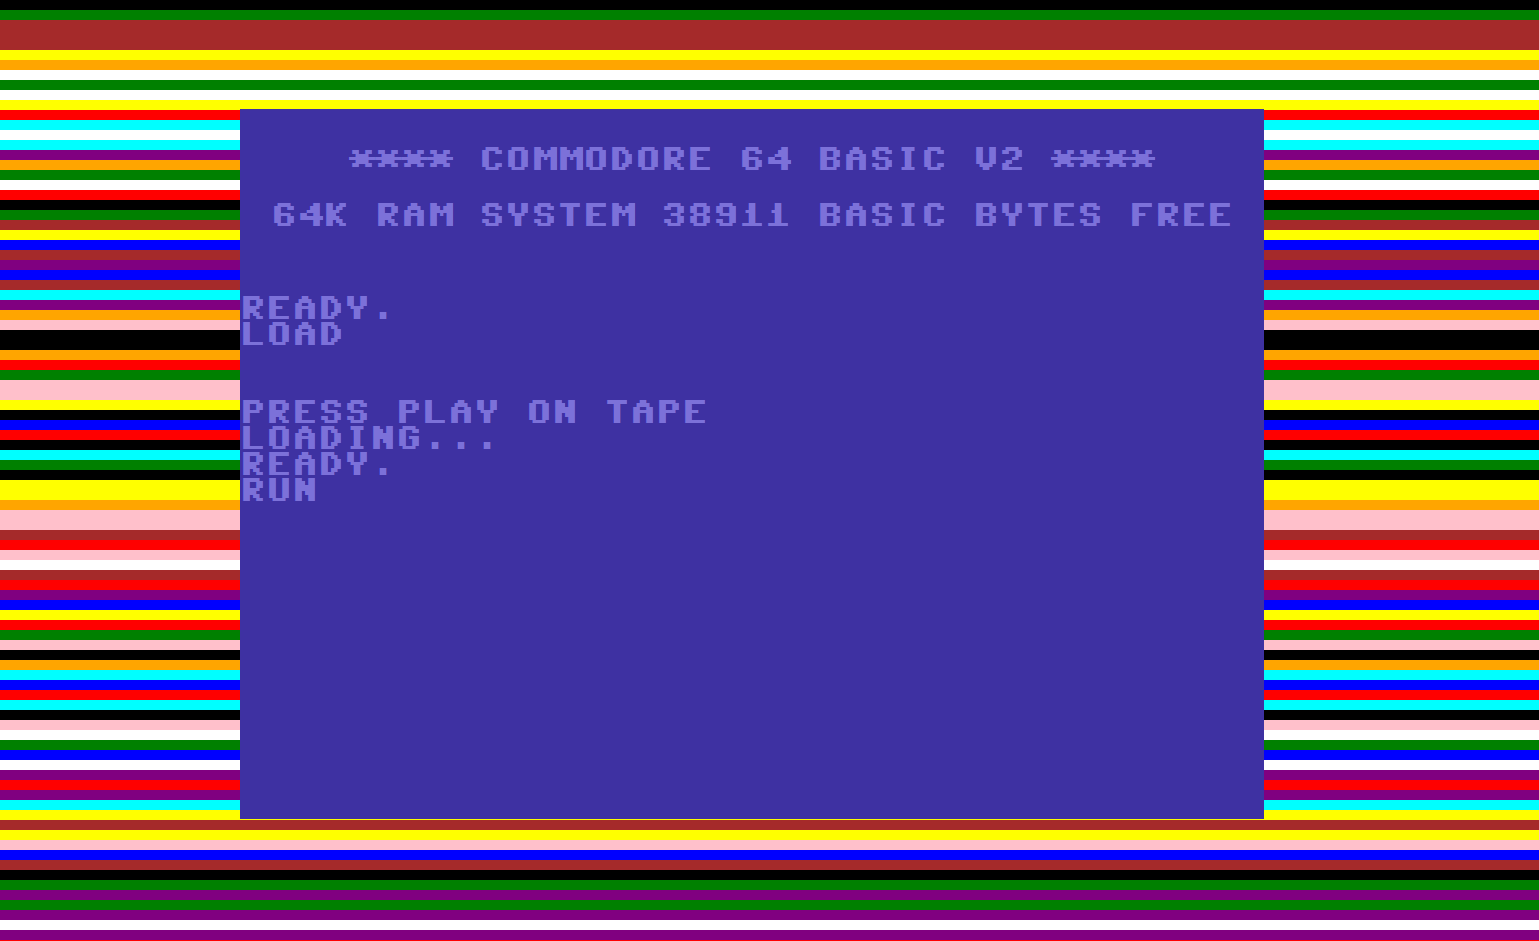 The typical loading screen from the old C64 computer made of moving coloured lines